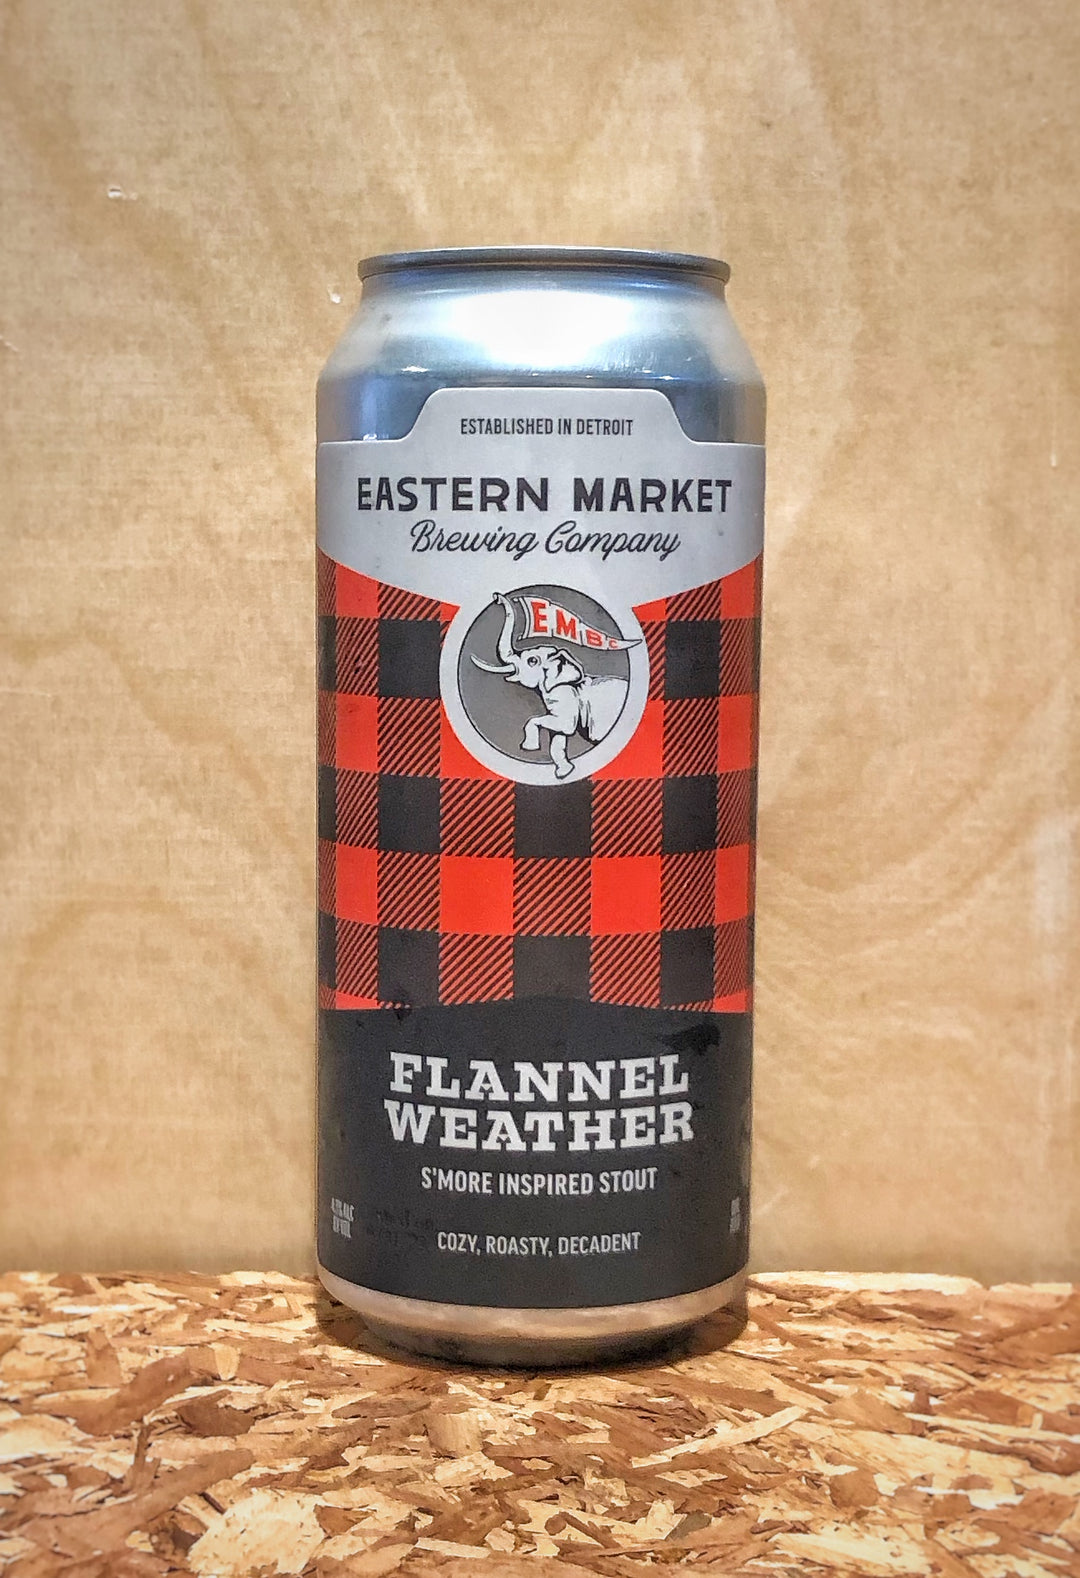 Eastern Market Brewing Co. 'Flannel Weather' S'more Inspired Stout (Detroit, MI)